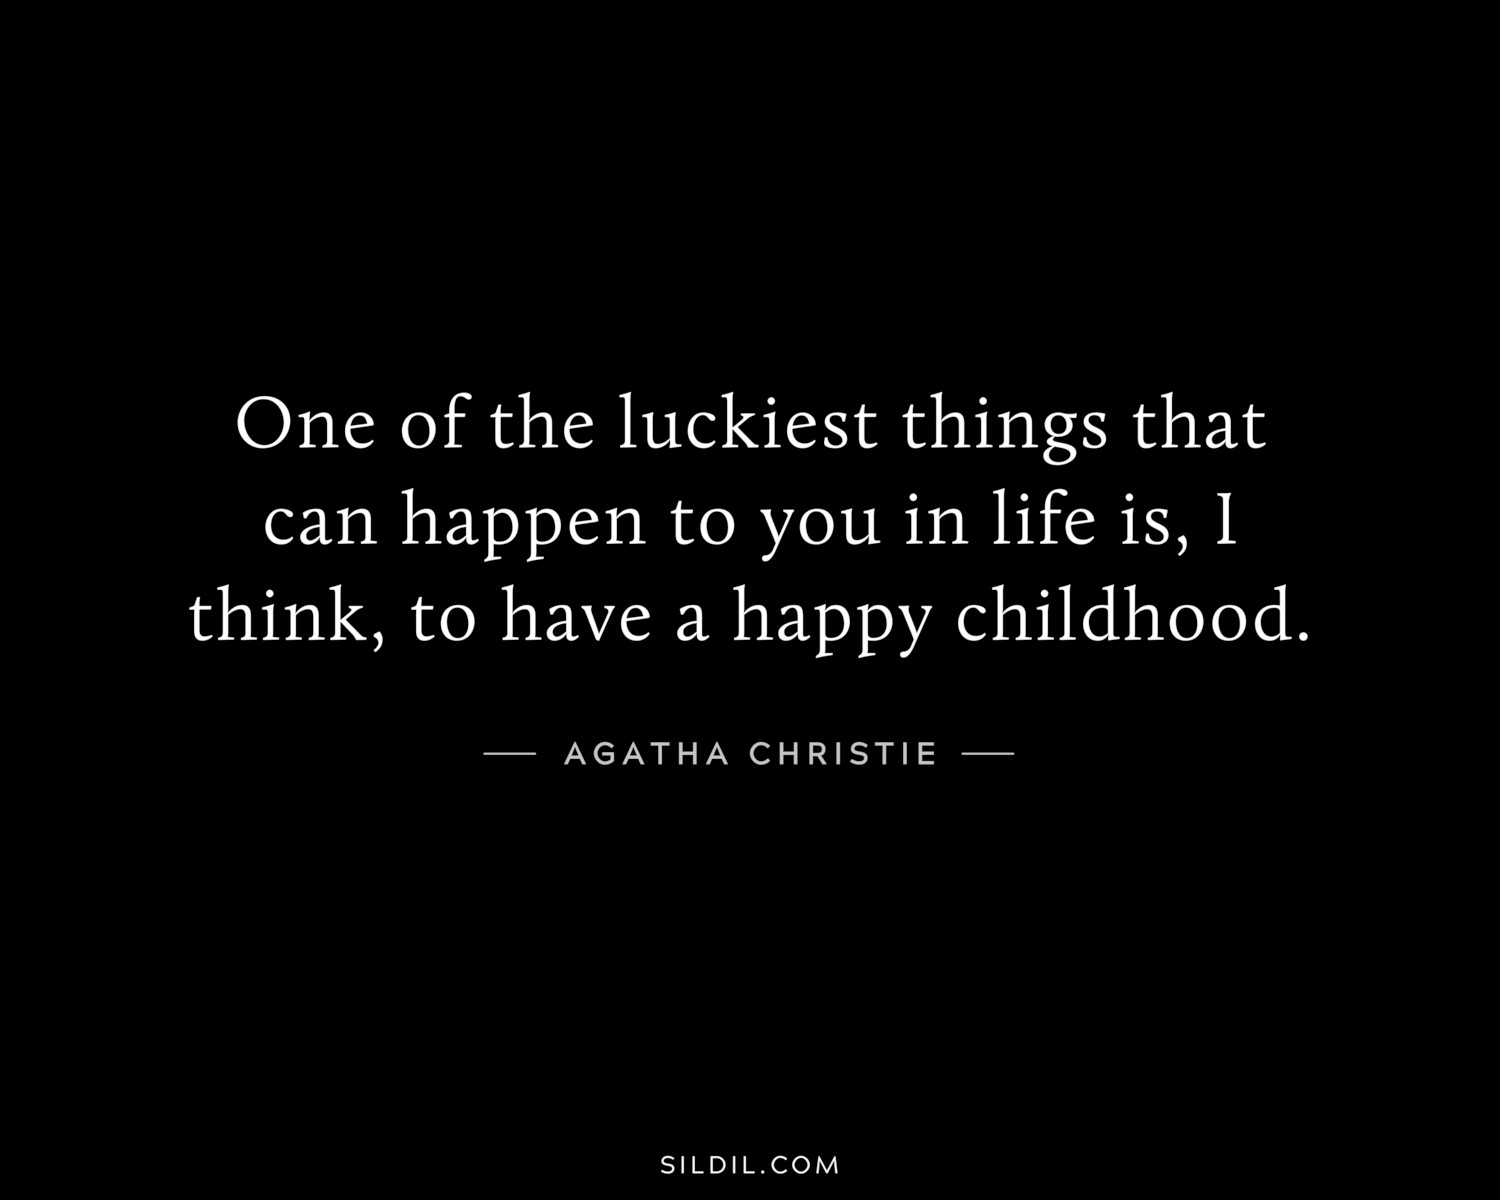 One of the luckiest things that can happen to you in life is, I think, to have a happy childhood.